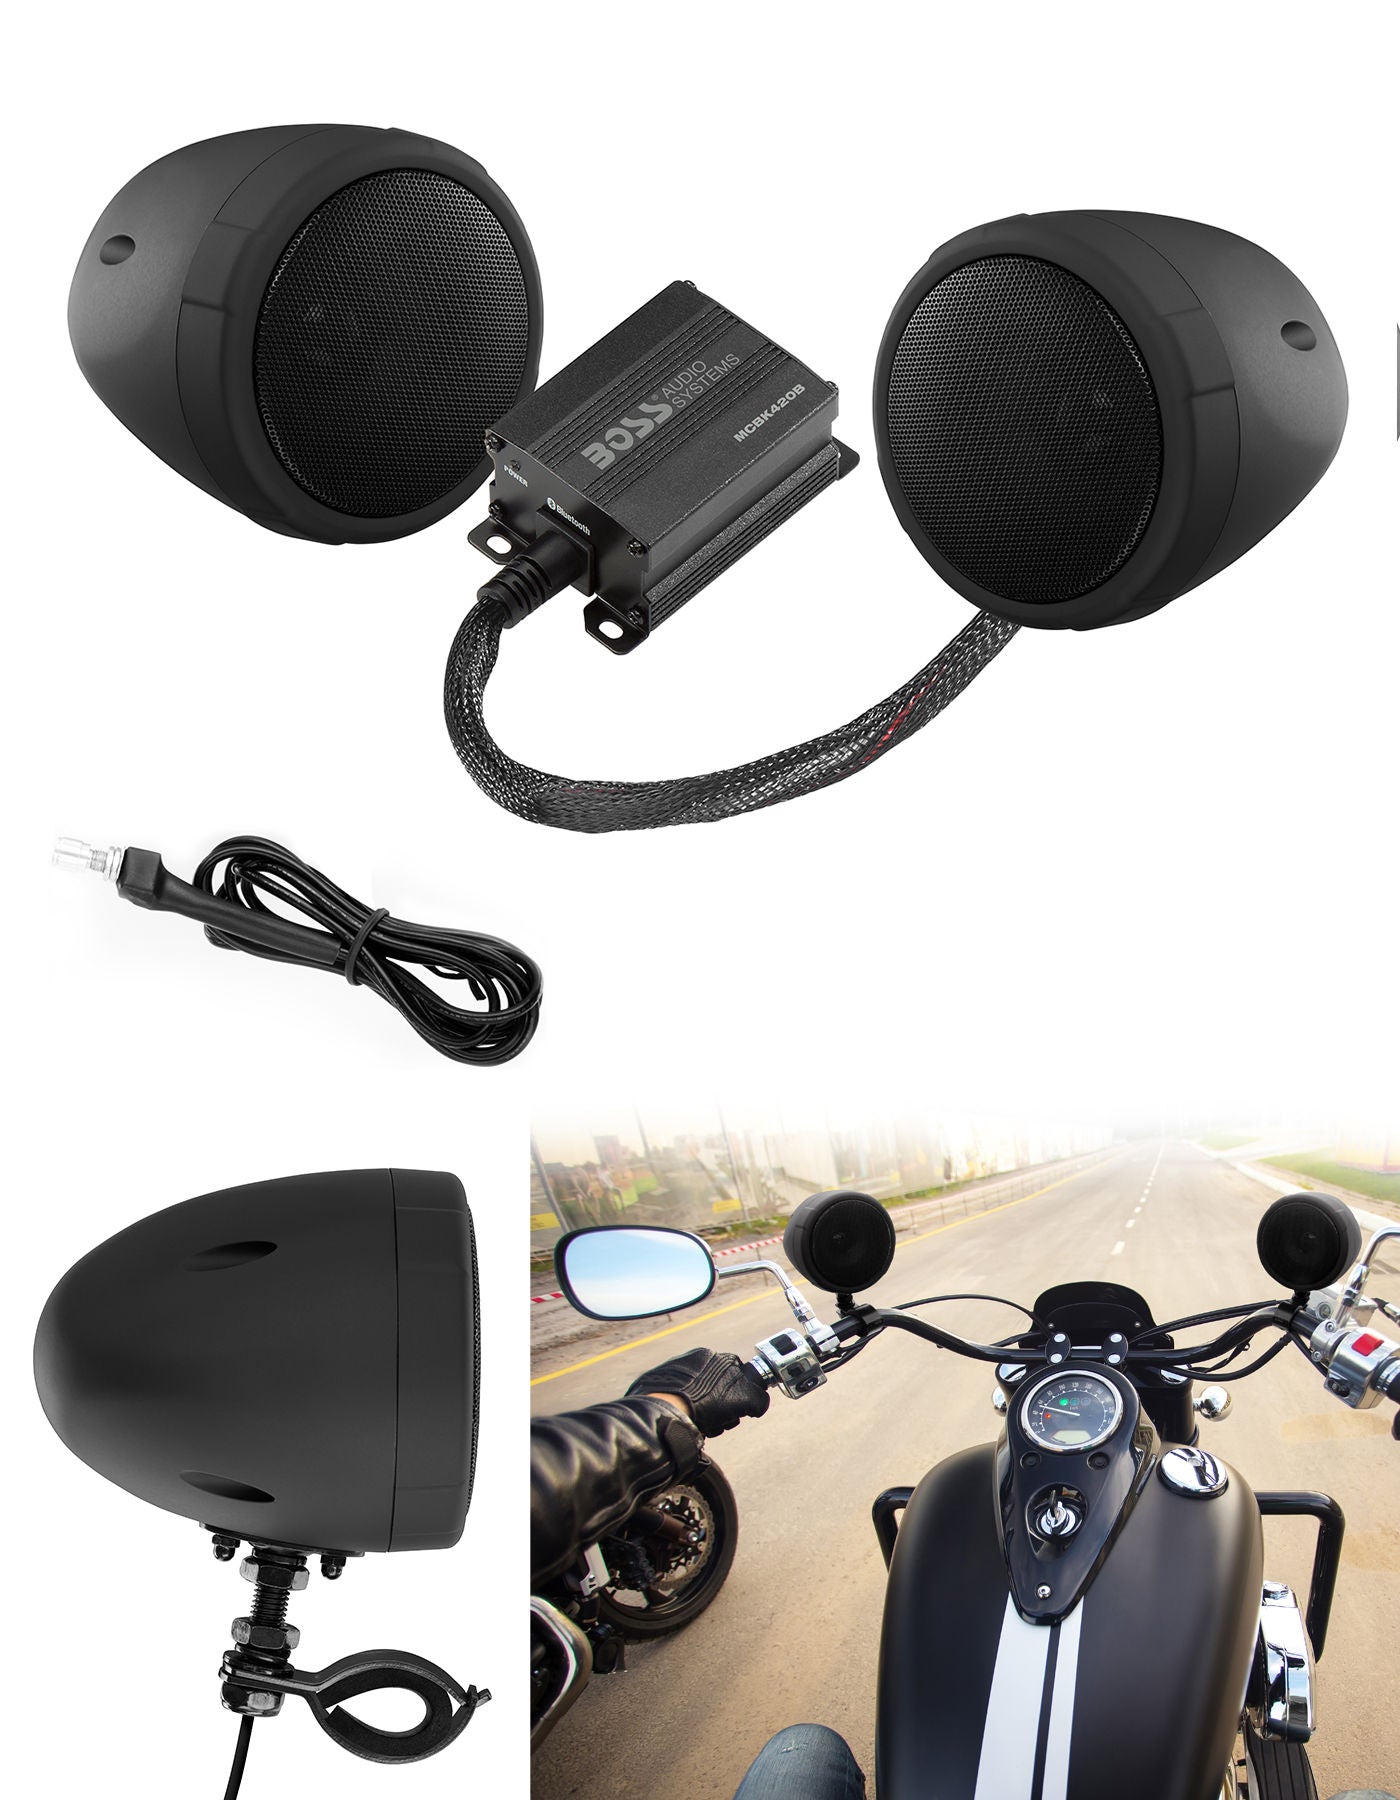 Boss MCBK420B - Black 600 watt Motorcycle/ATV Sound System with Bluetooth Audio Streaming, One pair of 3" Weather Proof Speakers, Aux Input and Volume Control